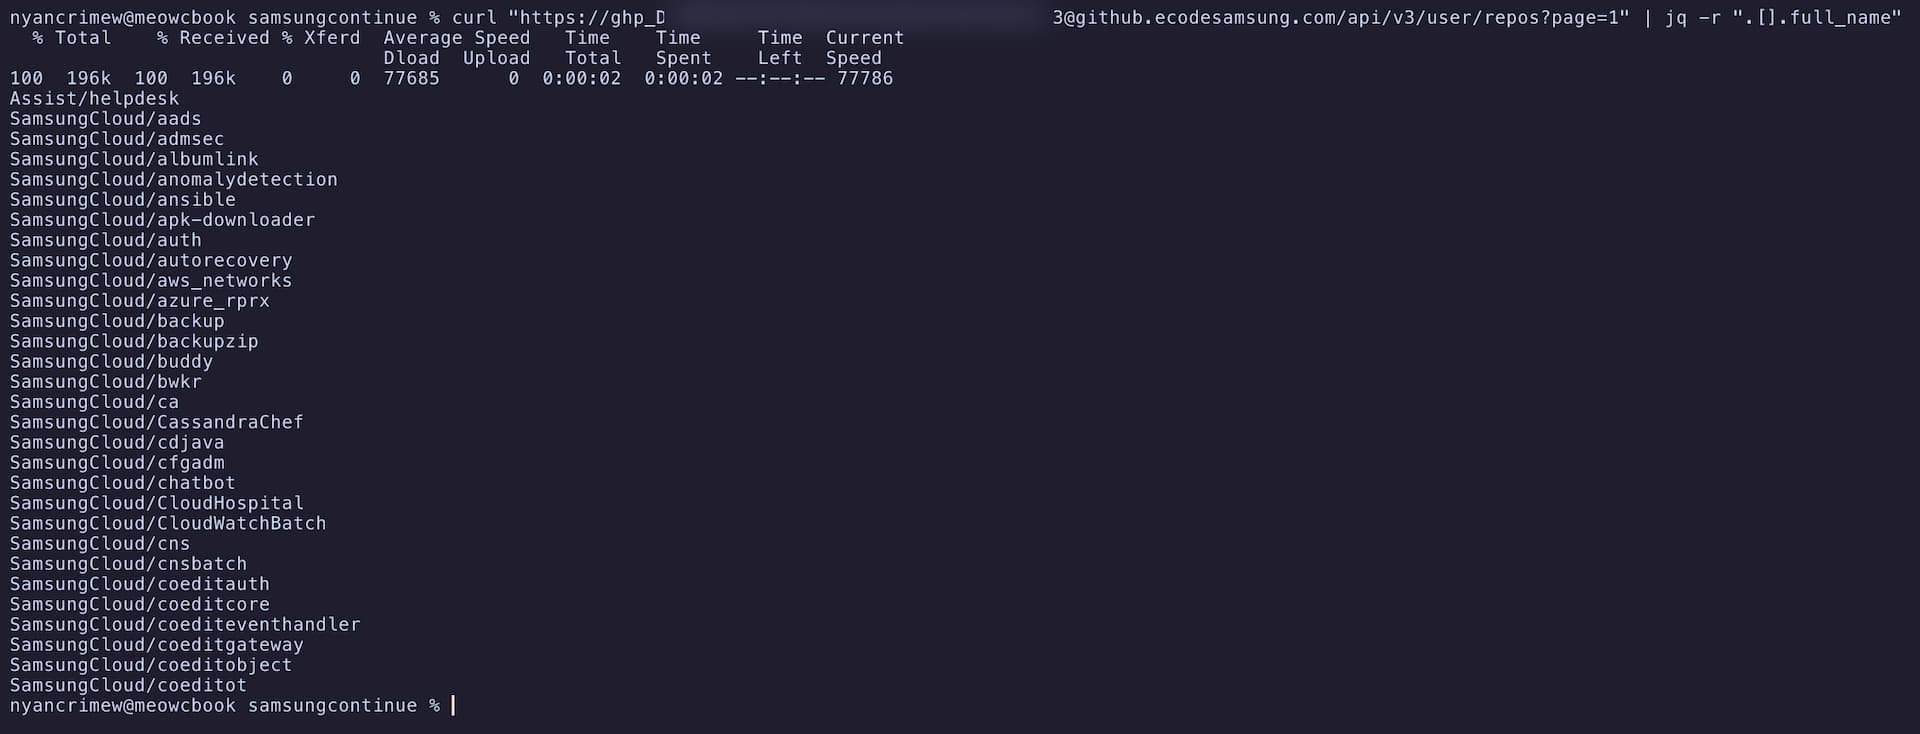 screenshot of a terminal showing me using curl and jq to get a list of repositories from the samsung ecode github api